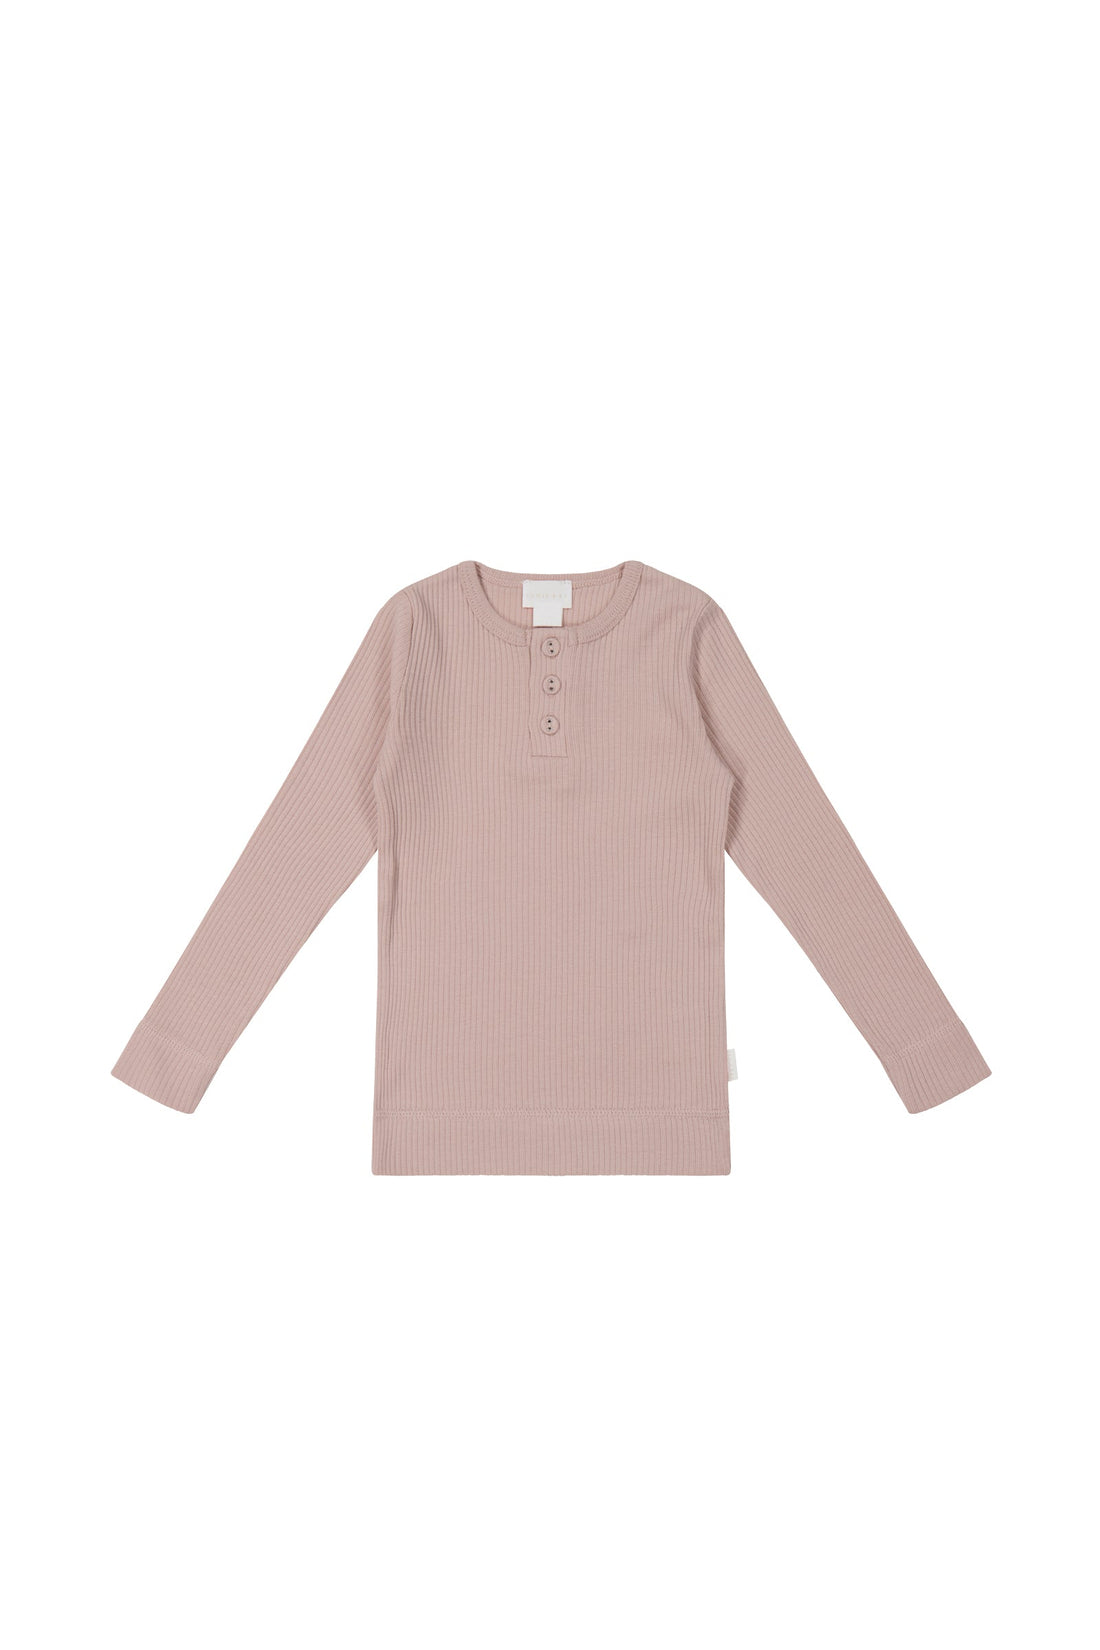 Organic Cotton Modal Long Sleeve Henley - Shell Pink Childrens Top from Jamie Kay USA